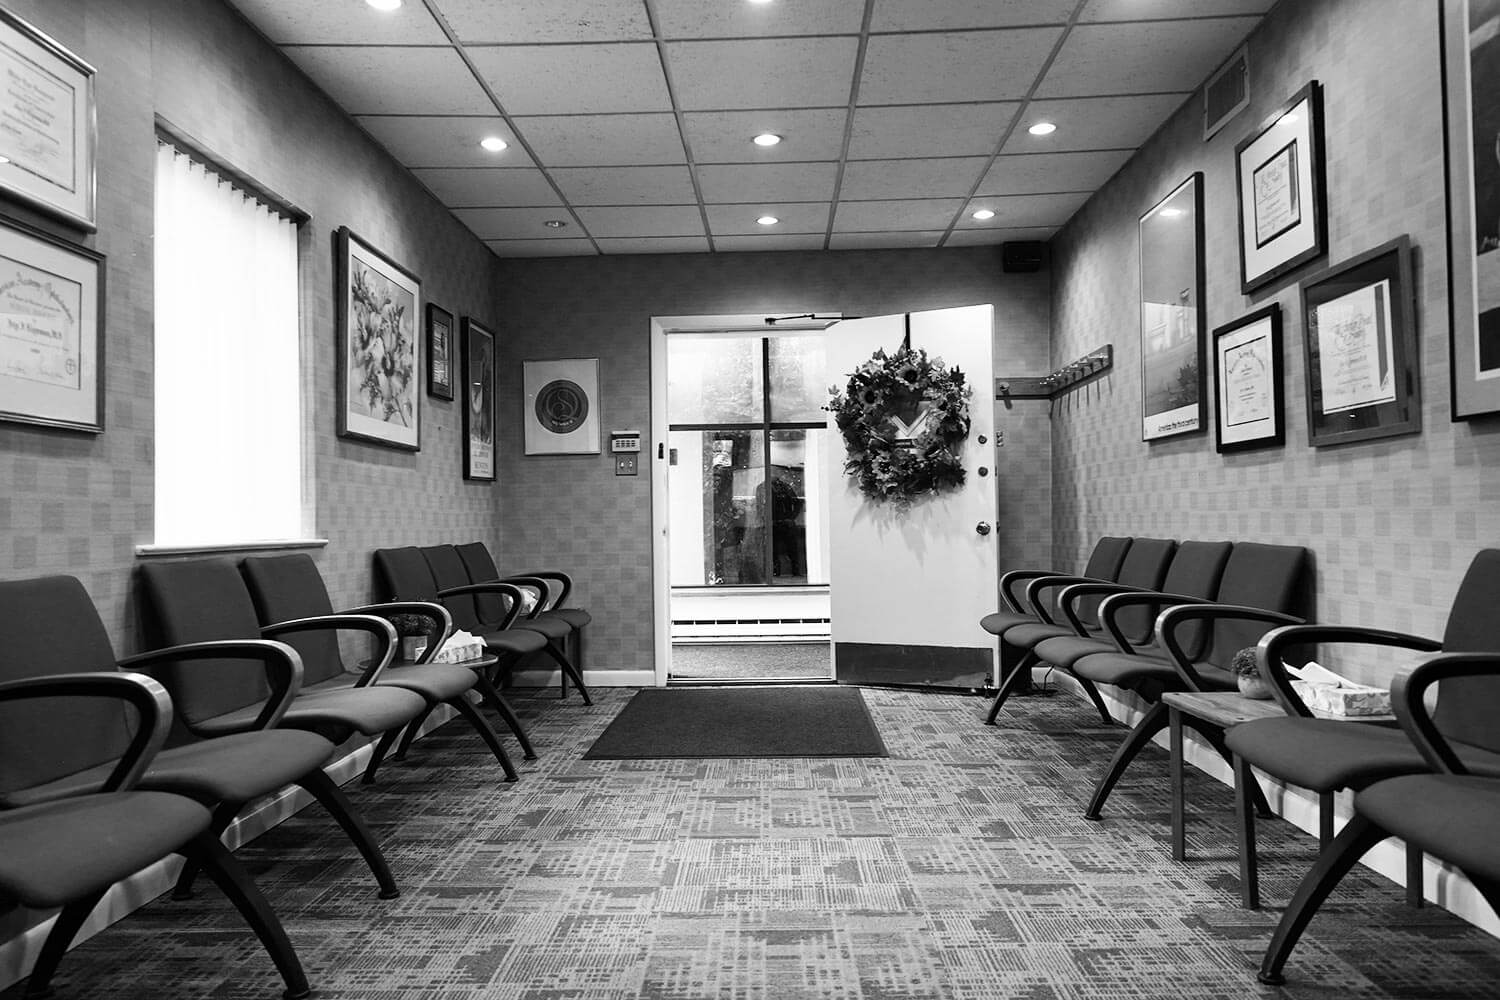 Black and White Image of Inside Our Waiting Room